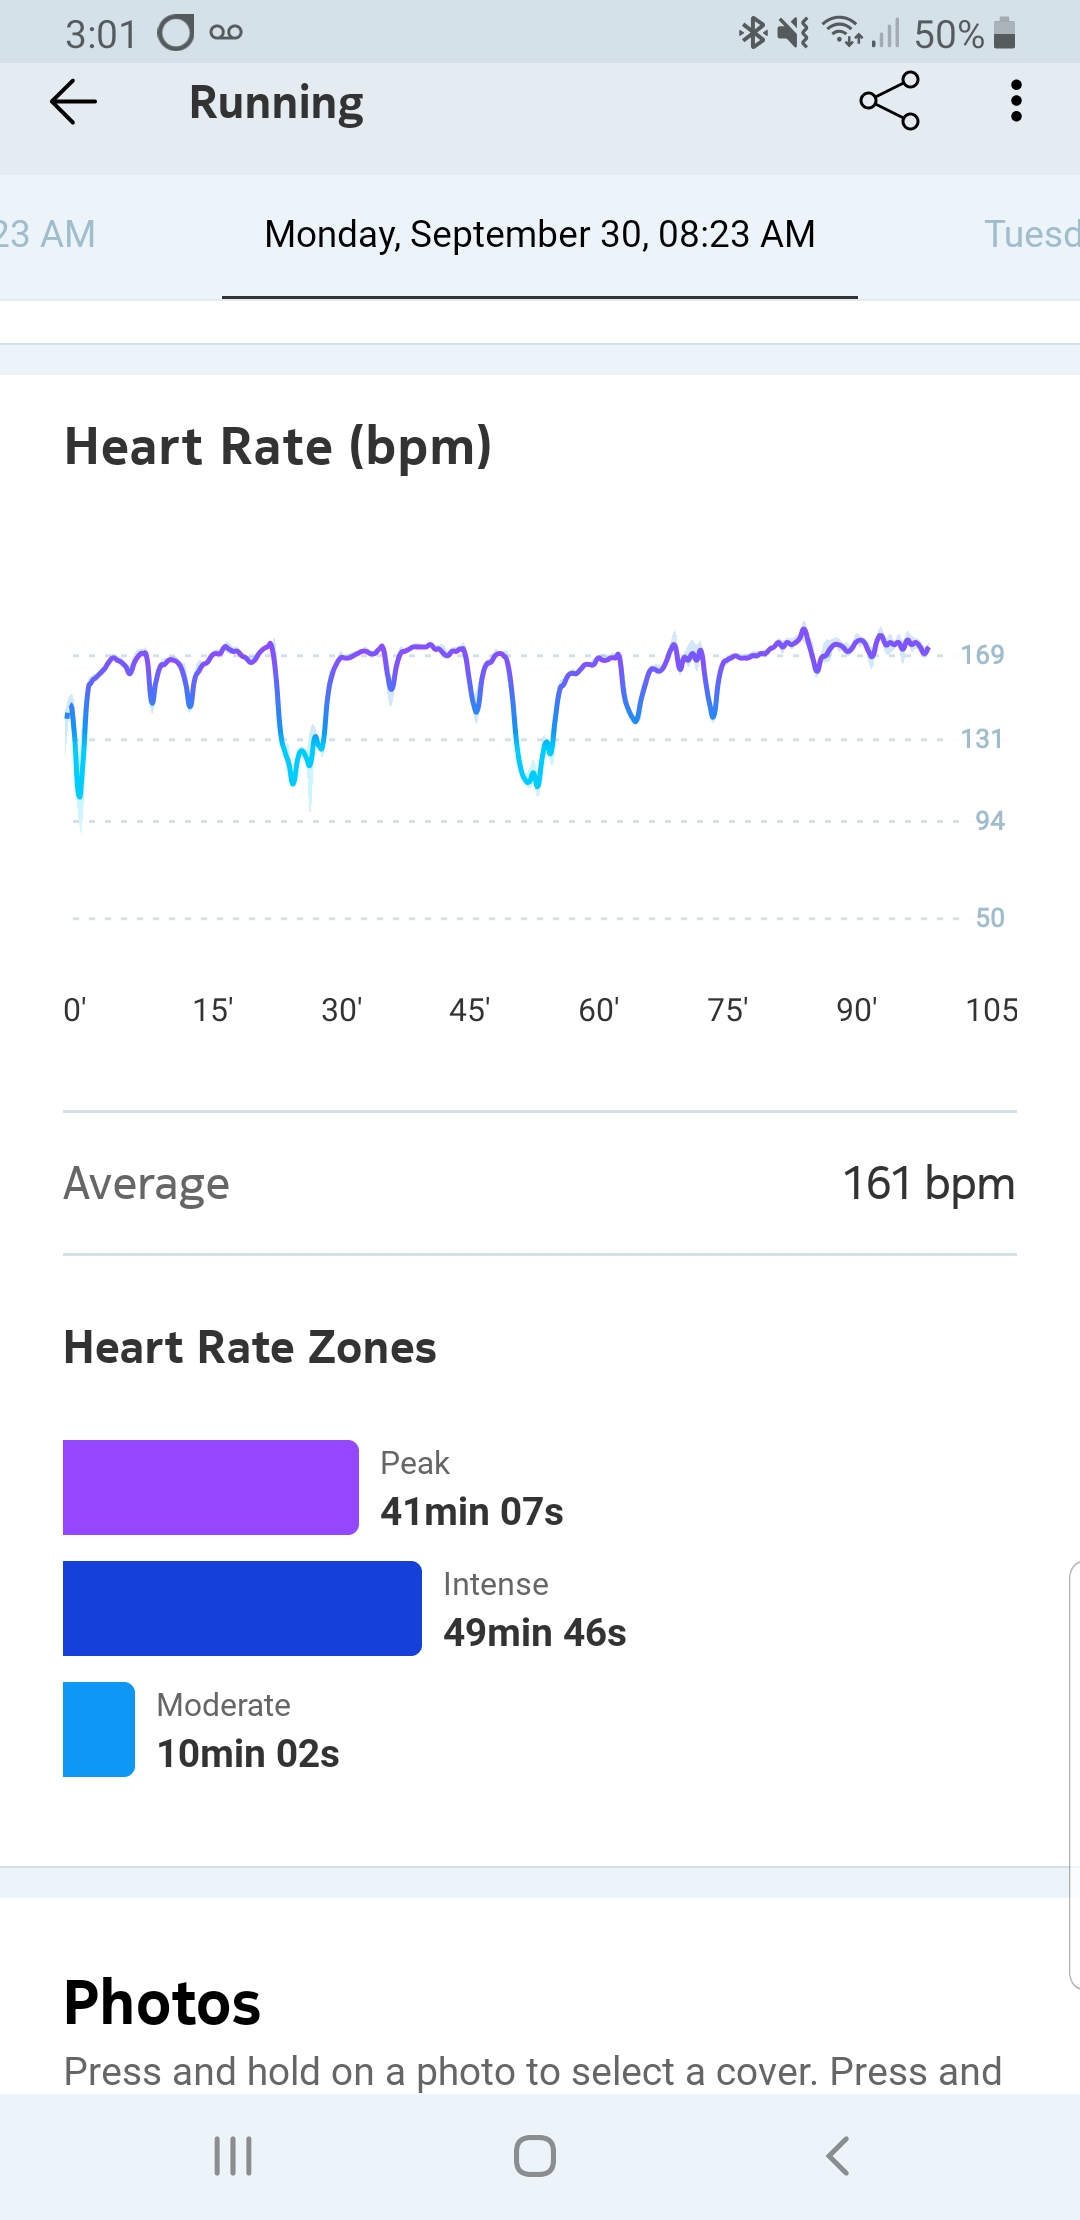 Claire’s average heart rate during one of her training sessions.